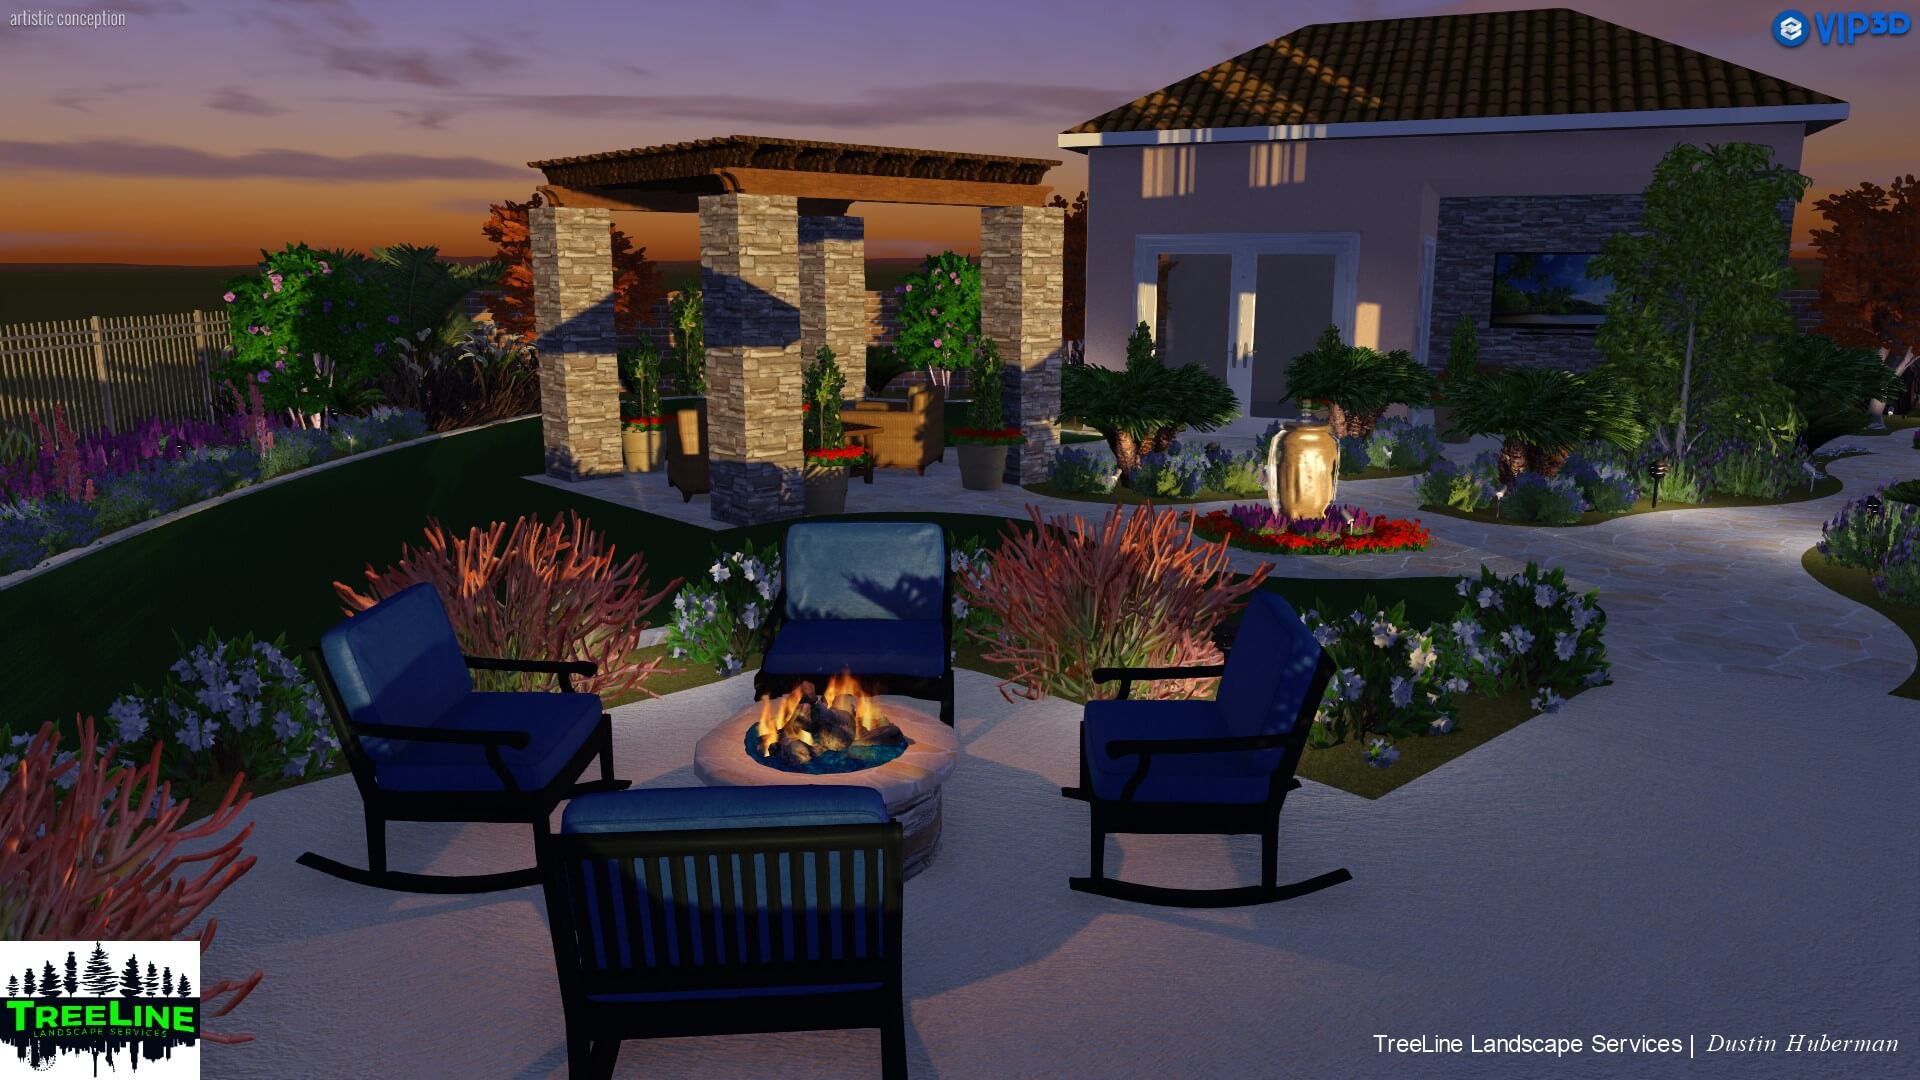 A patio with chairs and fire pit at night.